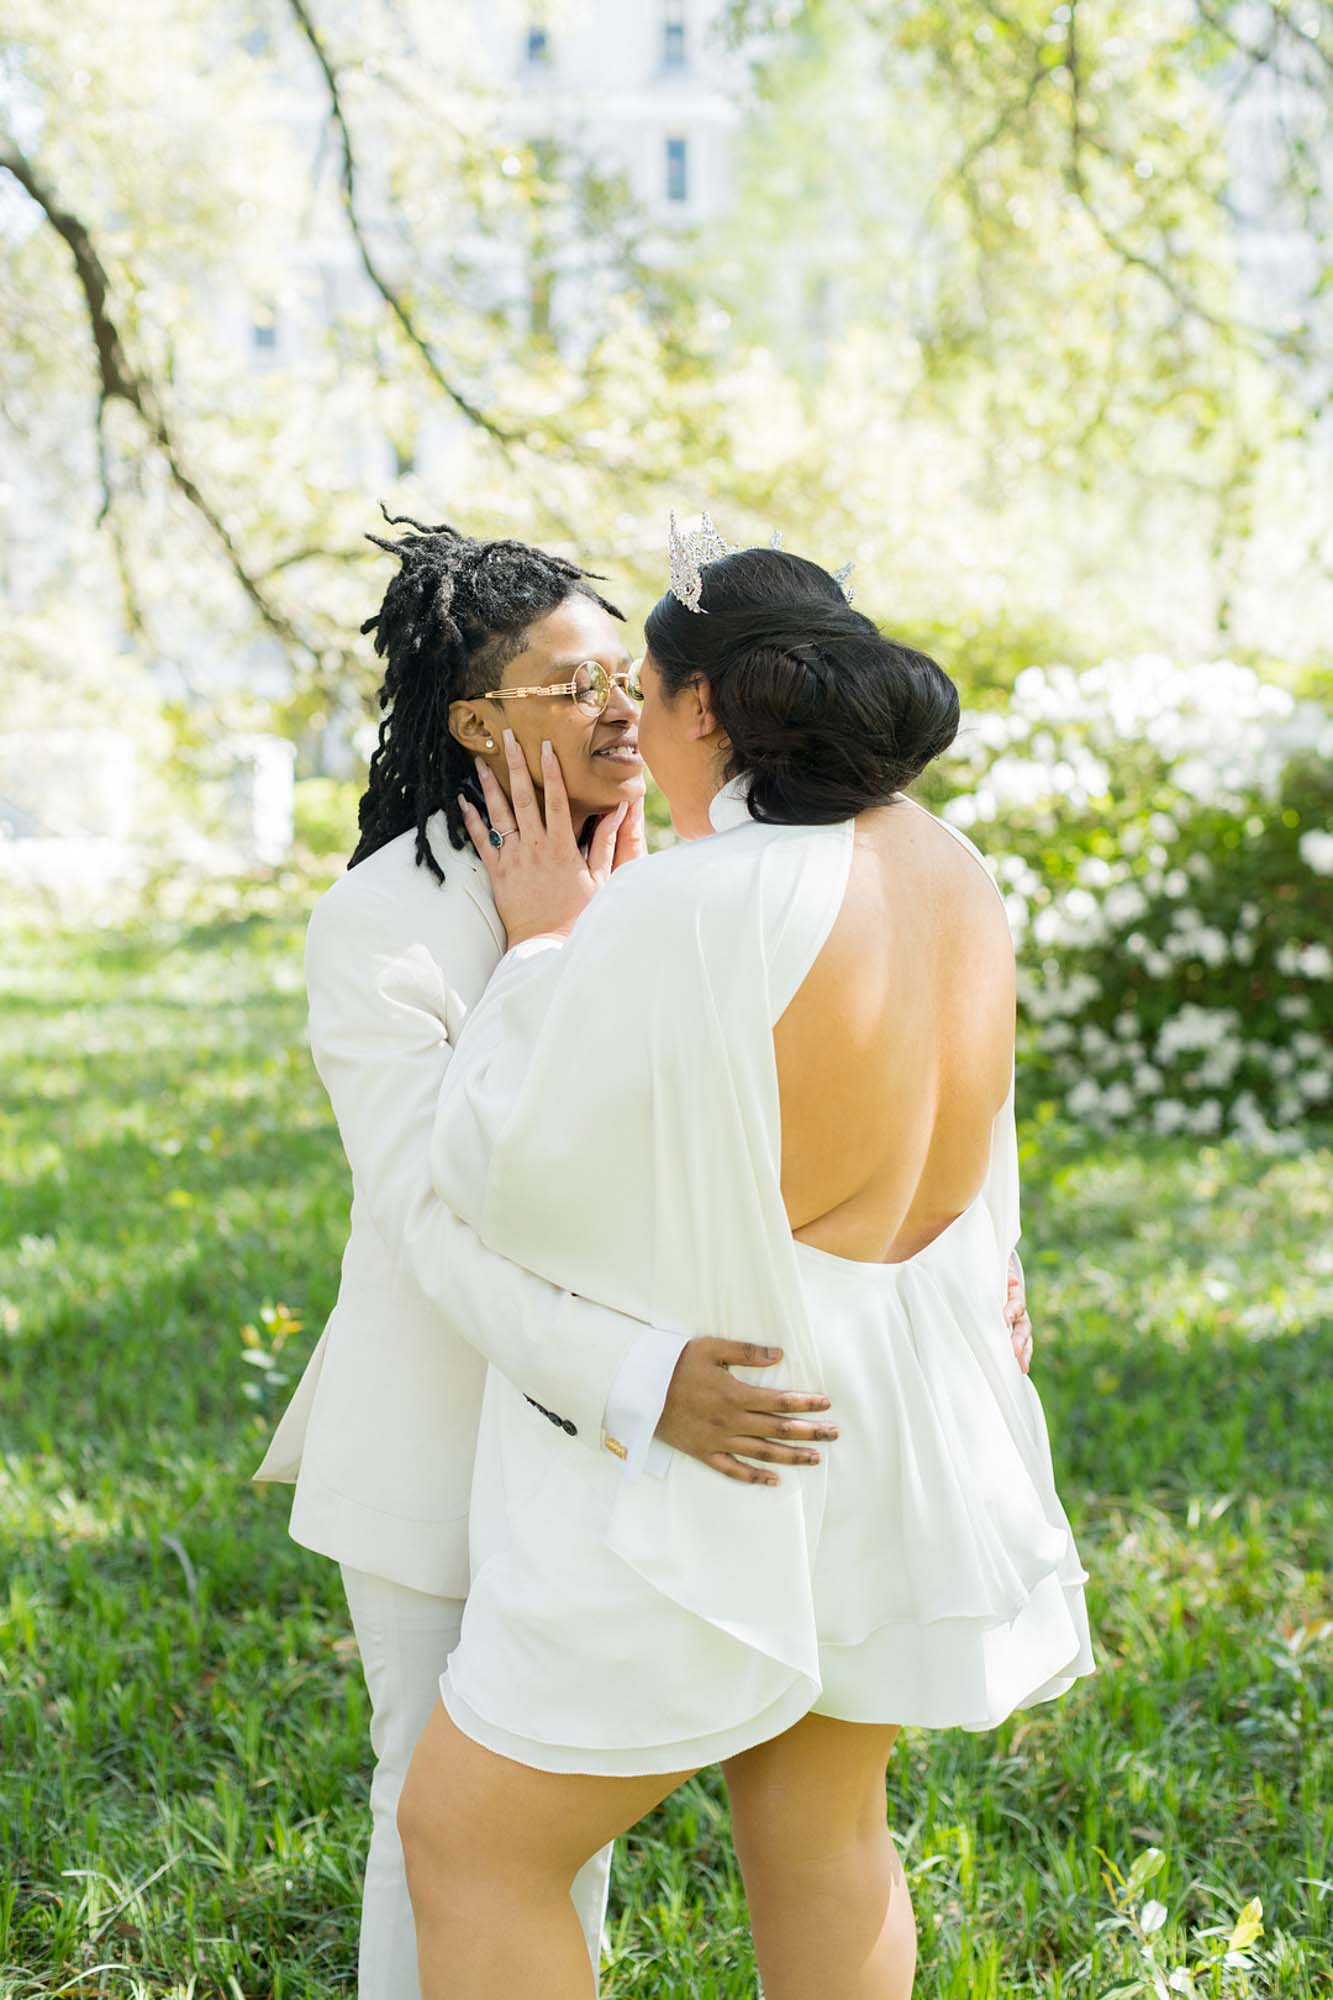 Sunny South Carolina elopement surrounded by greenery | Jessica Hunt Photography | Featured on Equally Wed, the leading LGBTQ+ wedding magazine - white tux, cut out dress, tiara, crown, gold rimmed glasses, first look